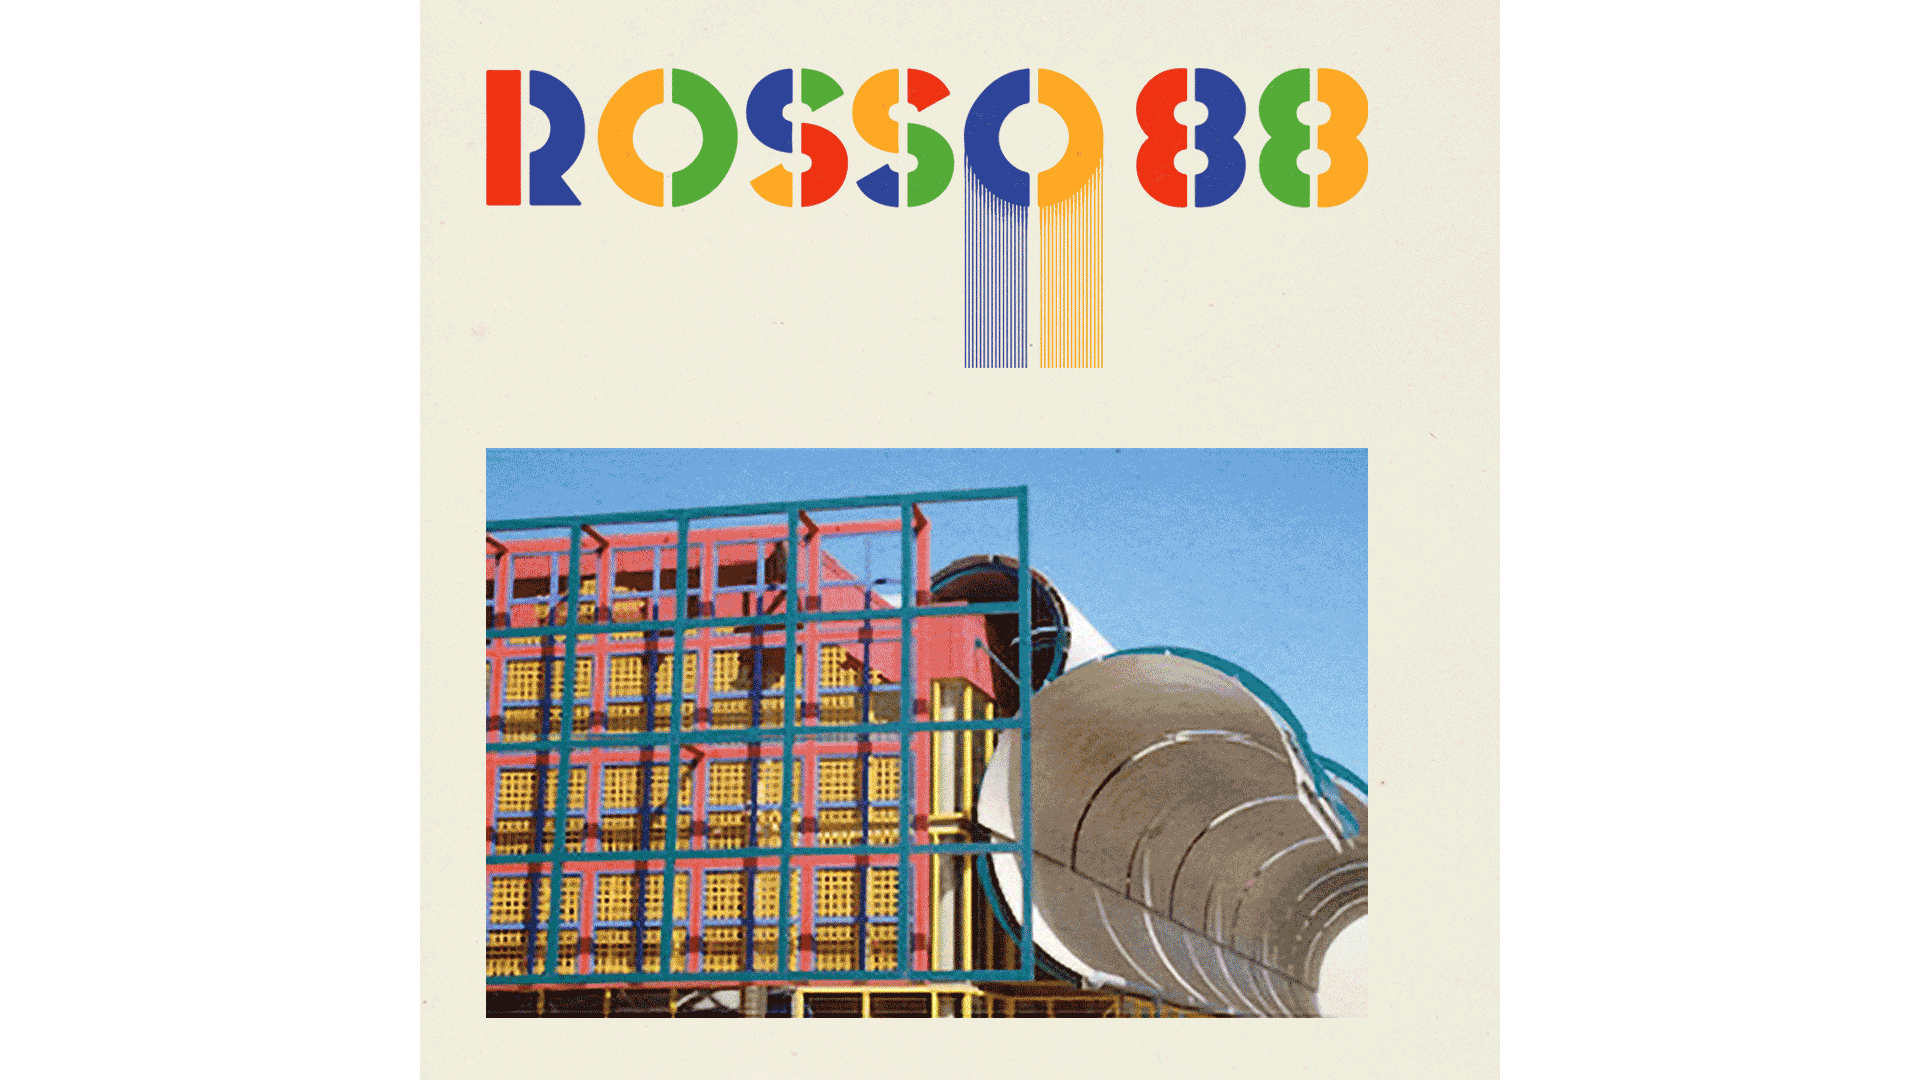 ROSSO 88 - a homage to 1980s Australiana